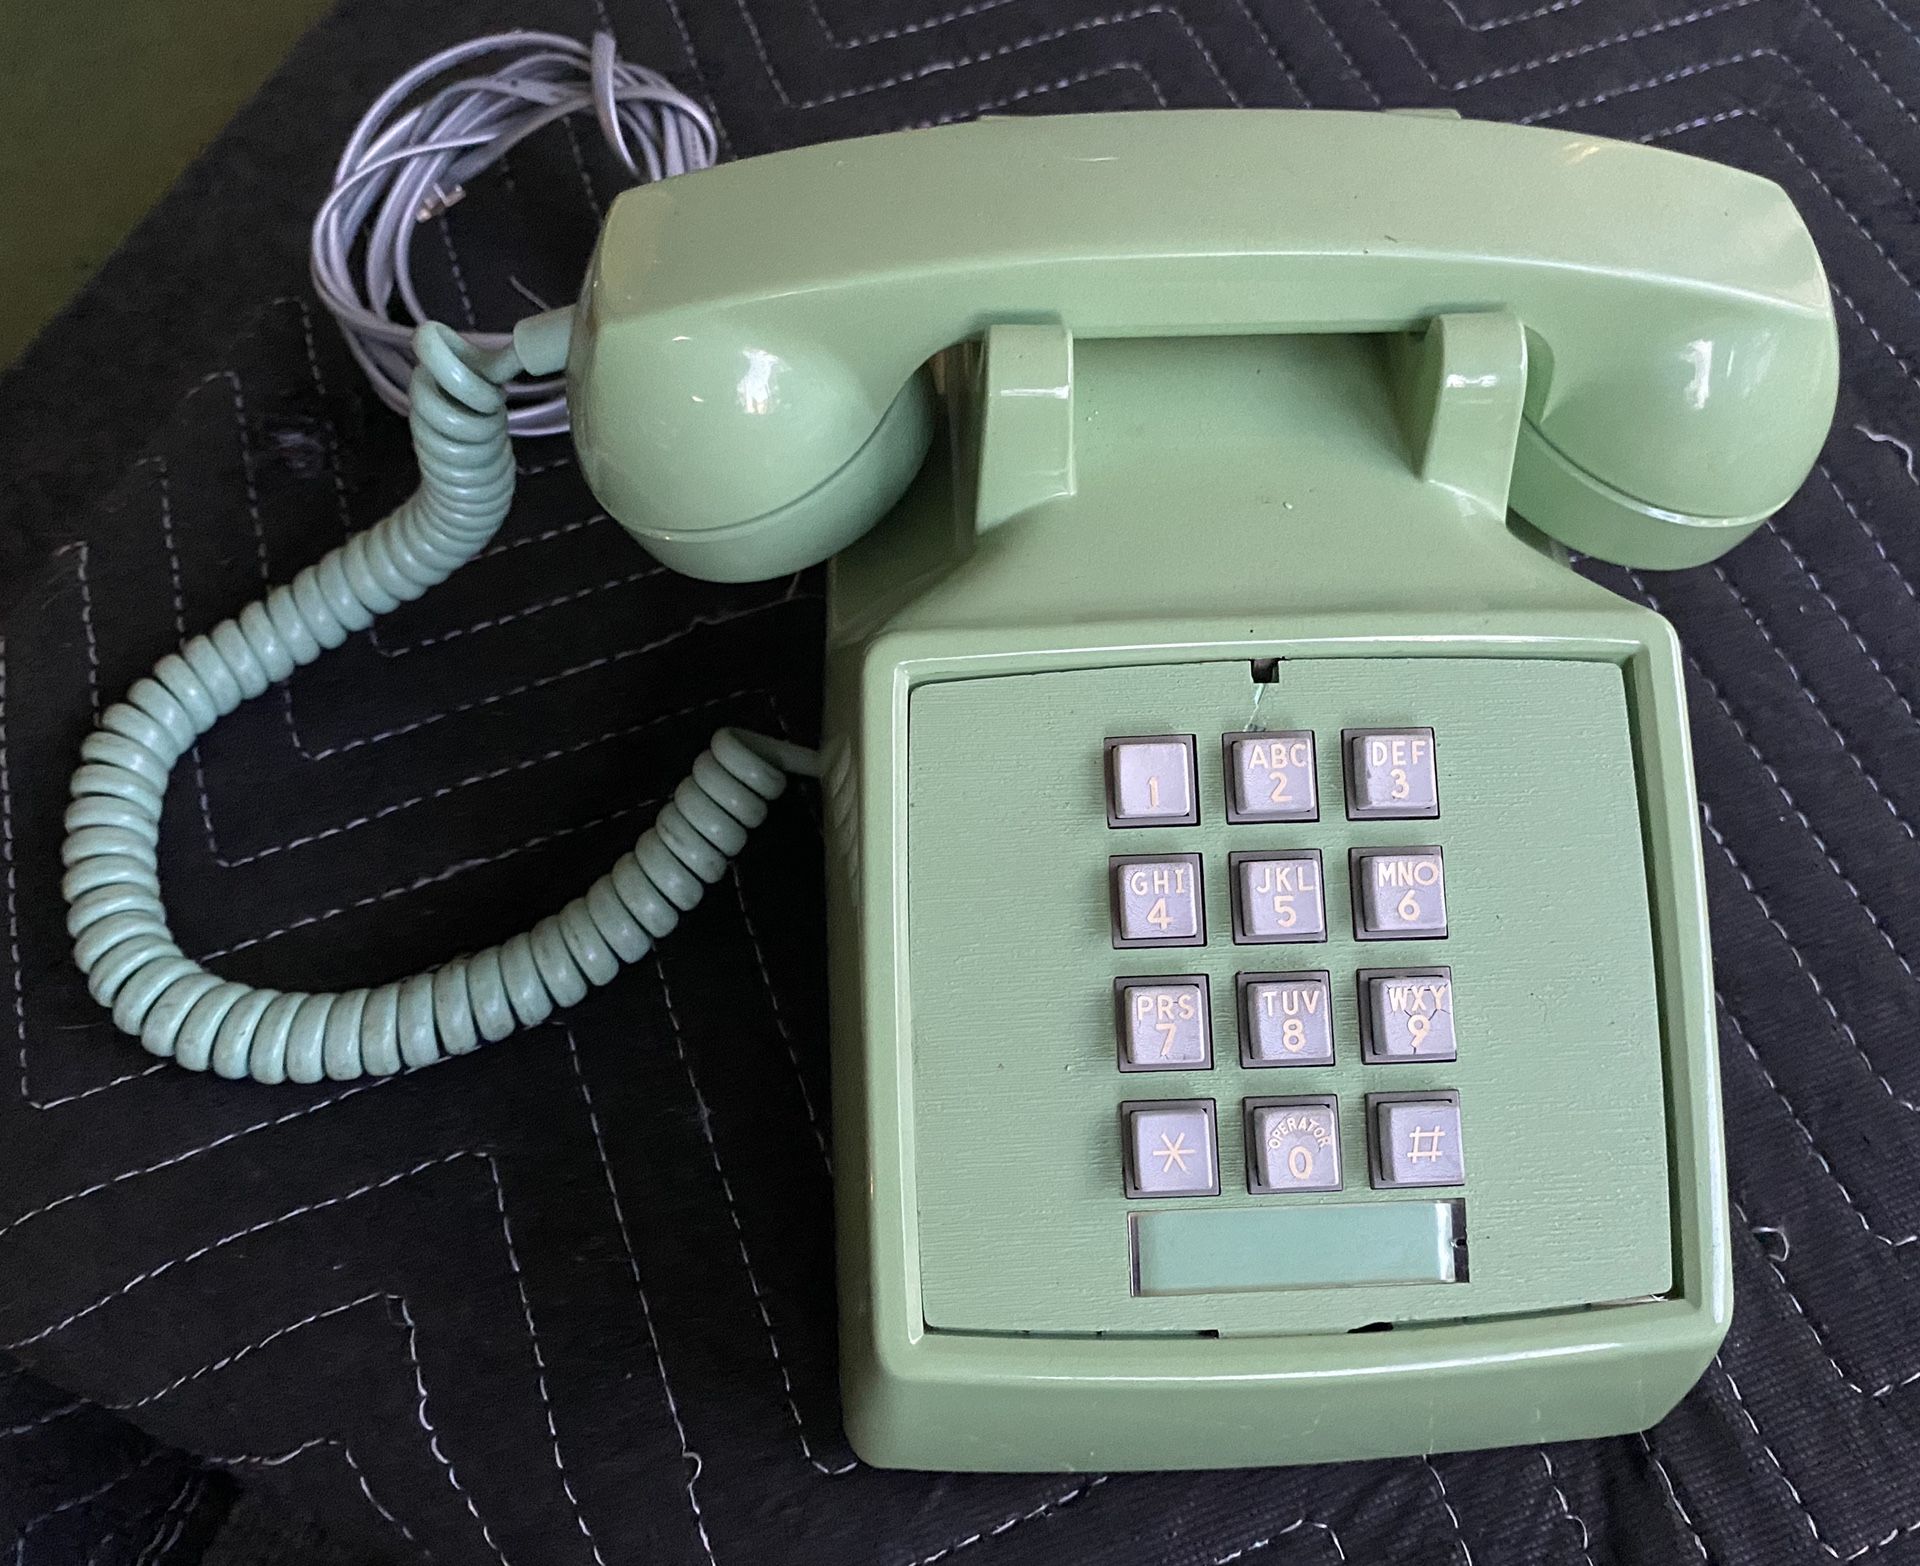 ITT vintage green landline telephone. Receives calls ok. Does not ring or dial out!! Possibly wired incorrectly. Being sold AS IS